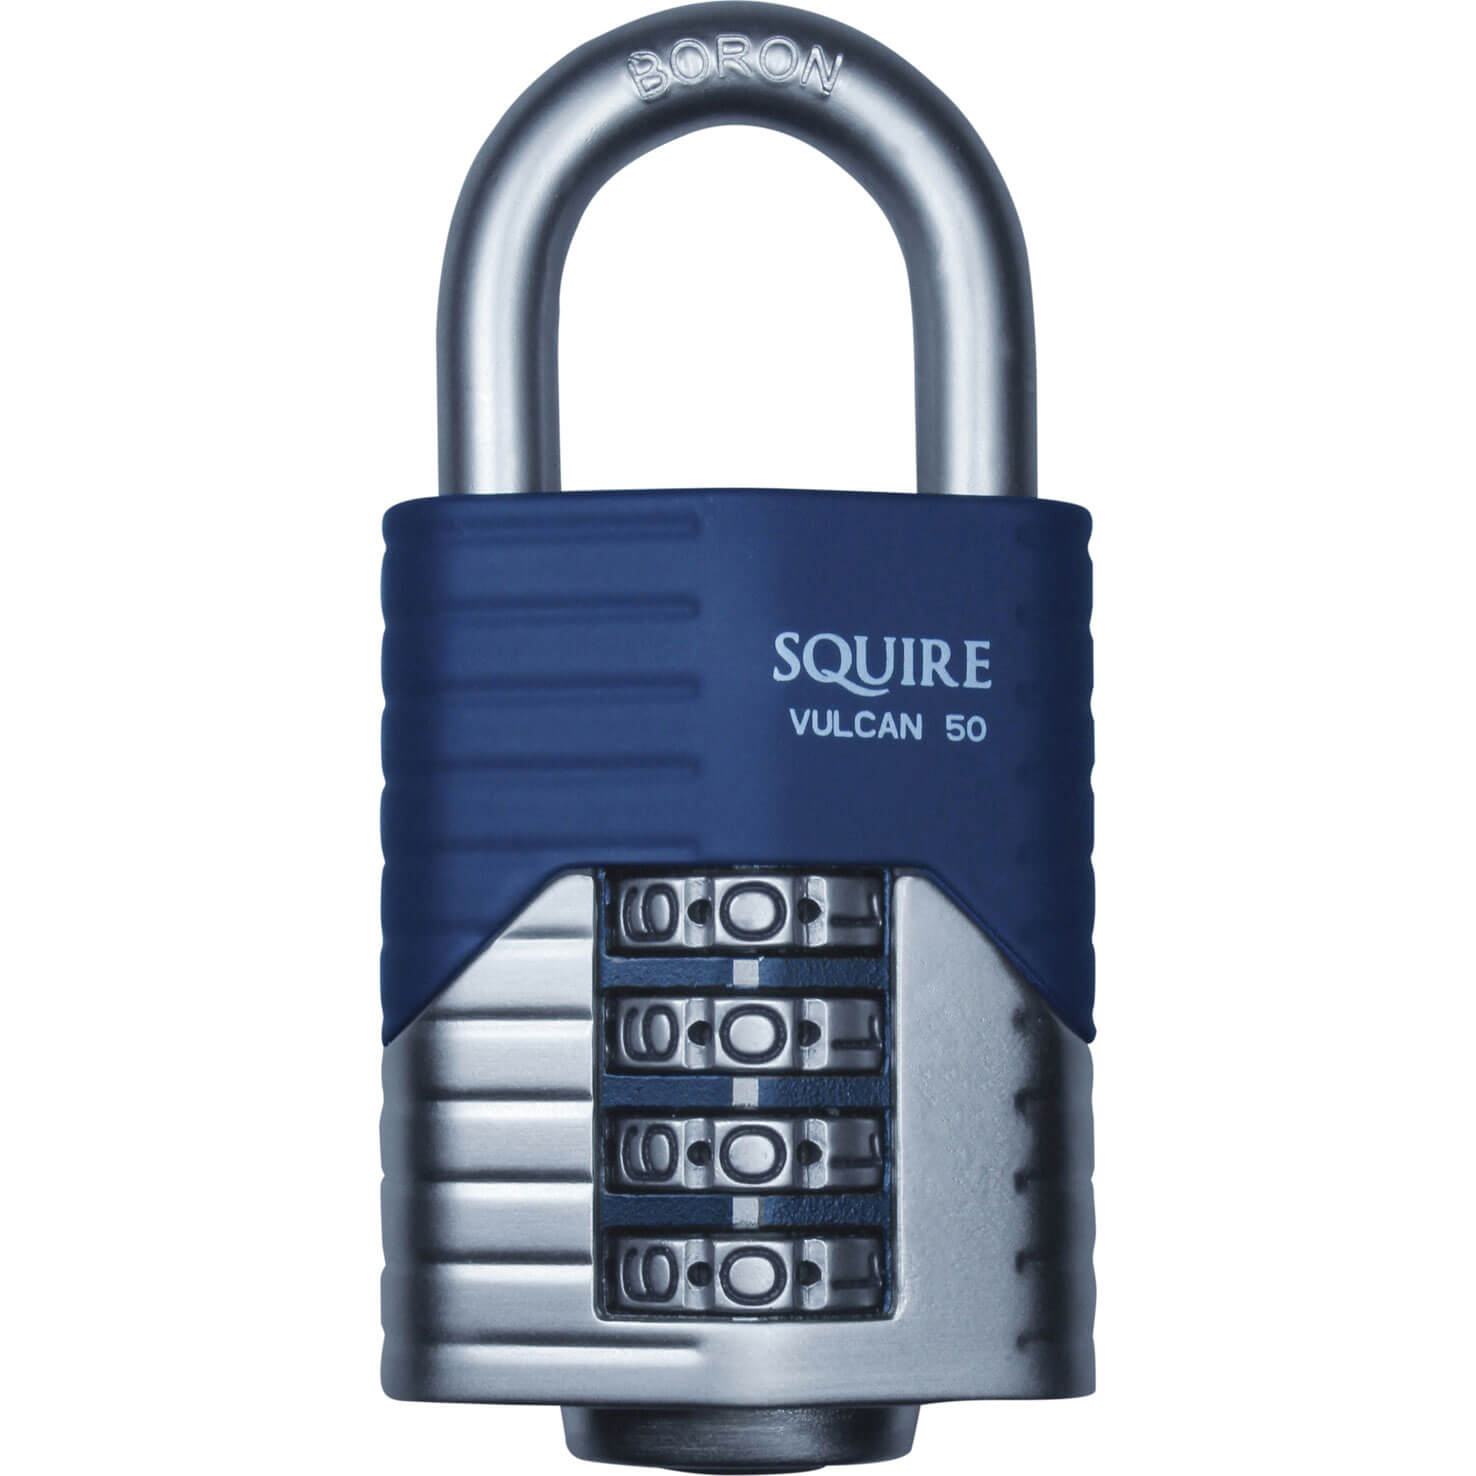 Image of Henry Squire Vulcan Boron Shackle Combination Padlock 50mm Standard